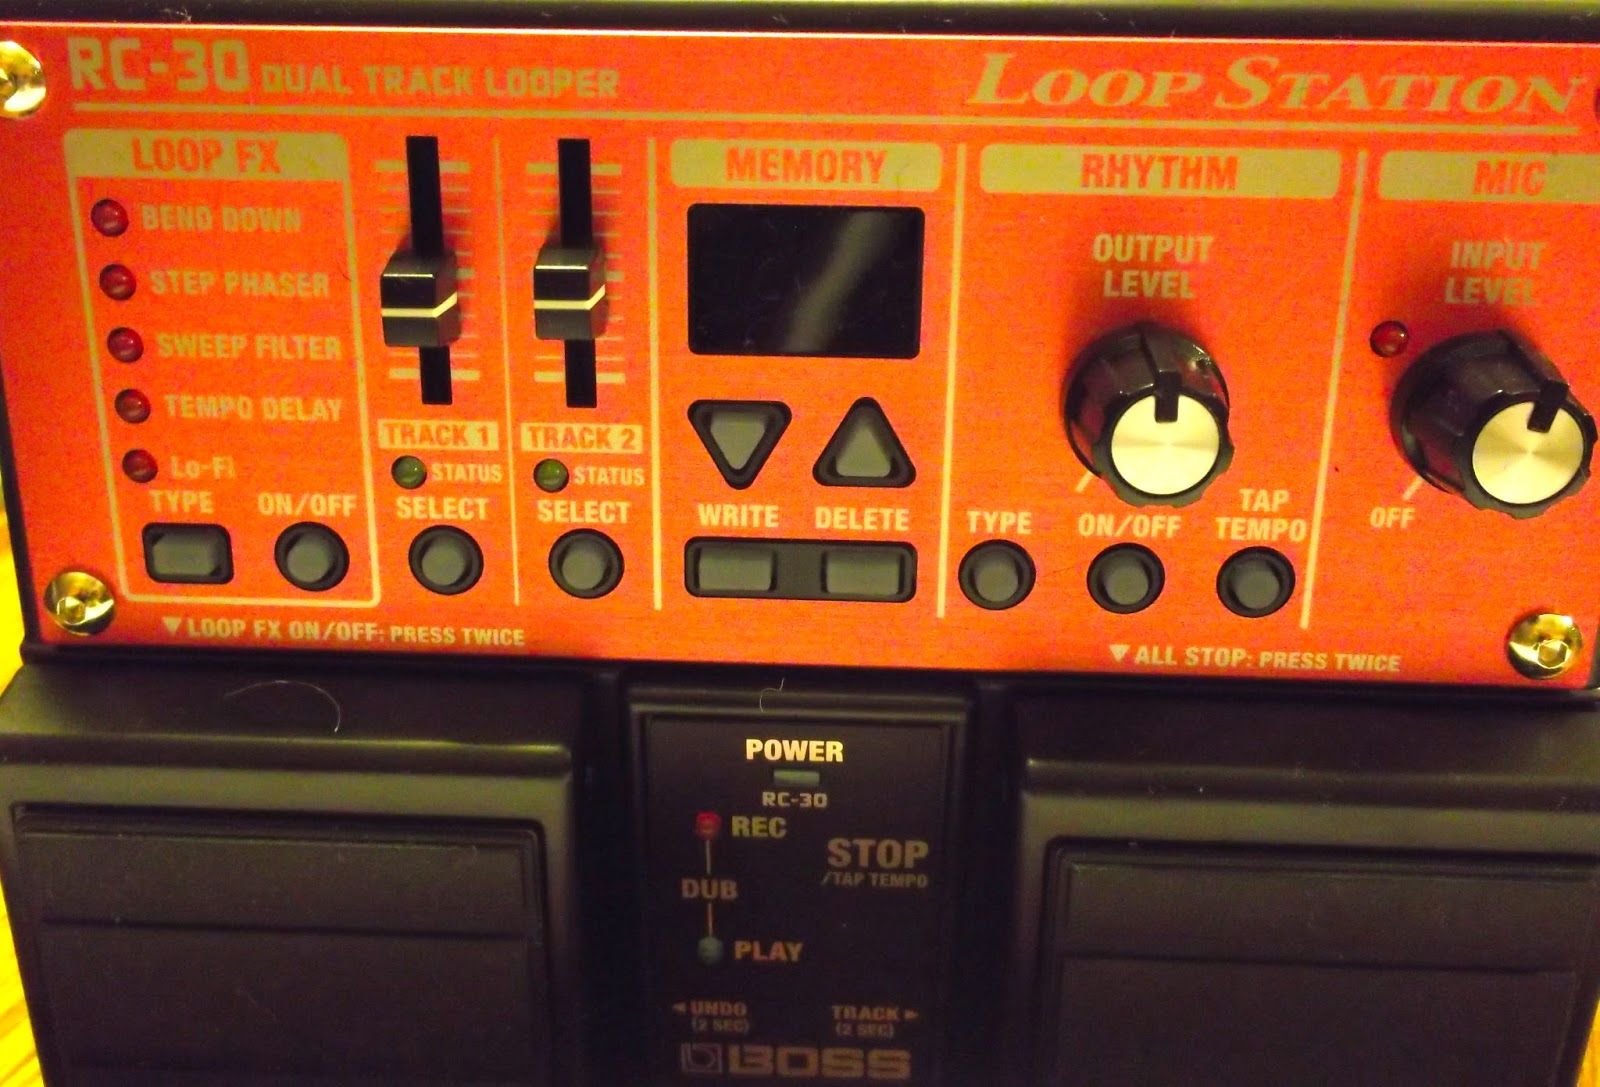 inspireformation-a working musician's blog: The Boss RC30 Loop